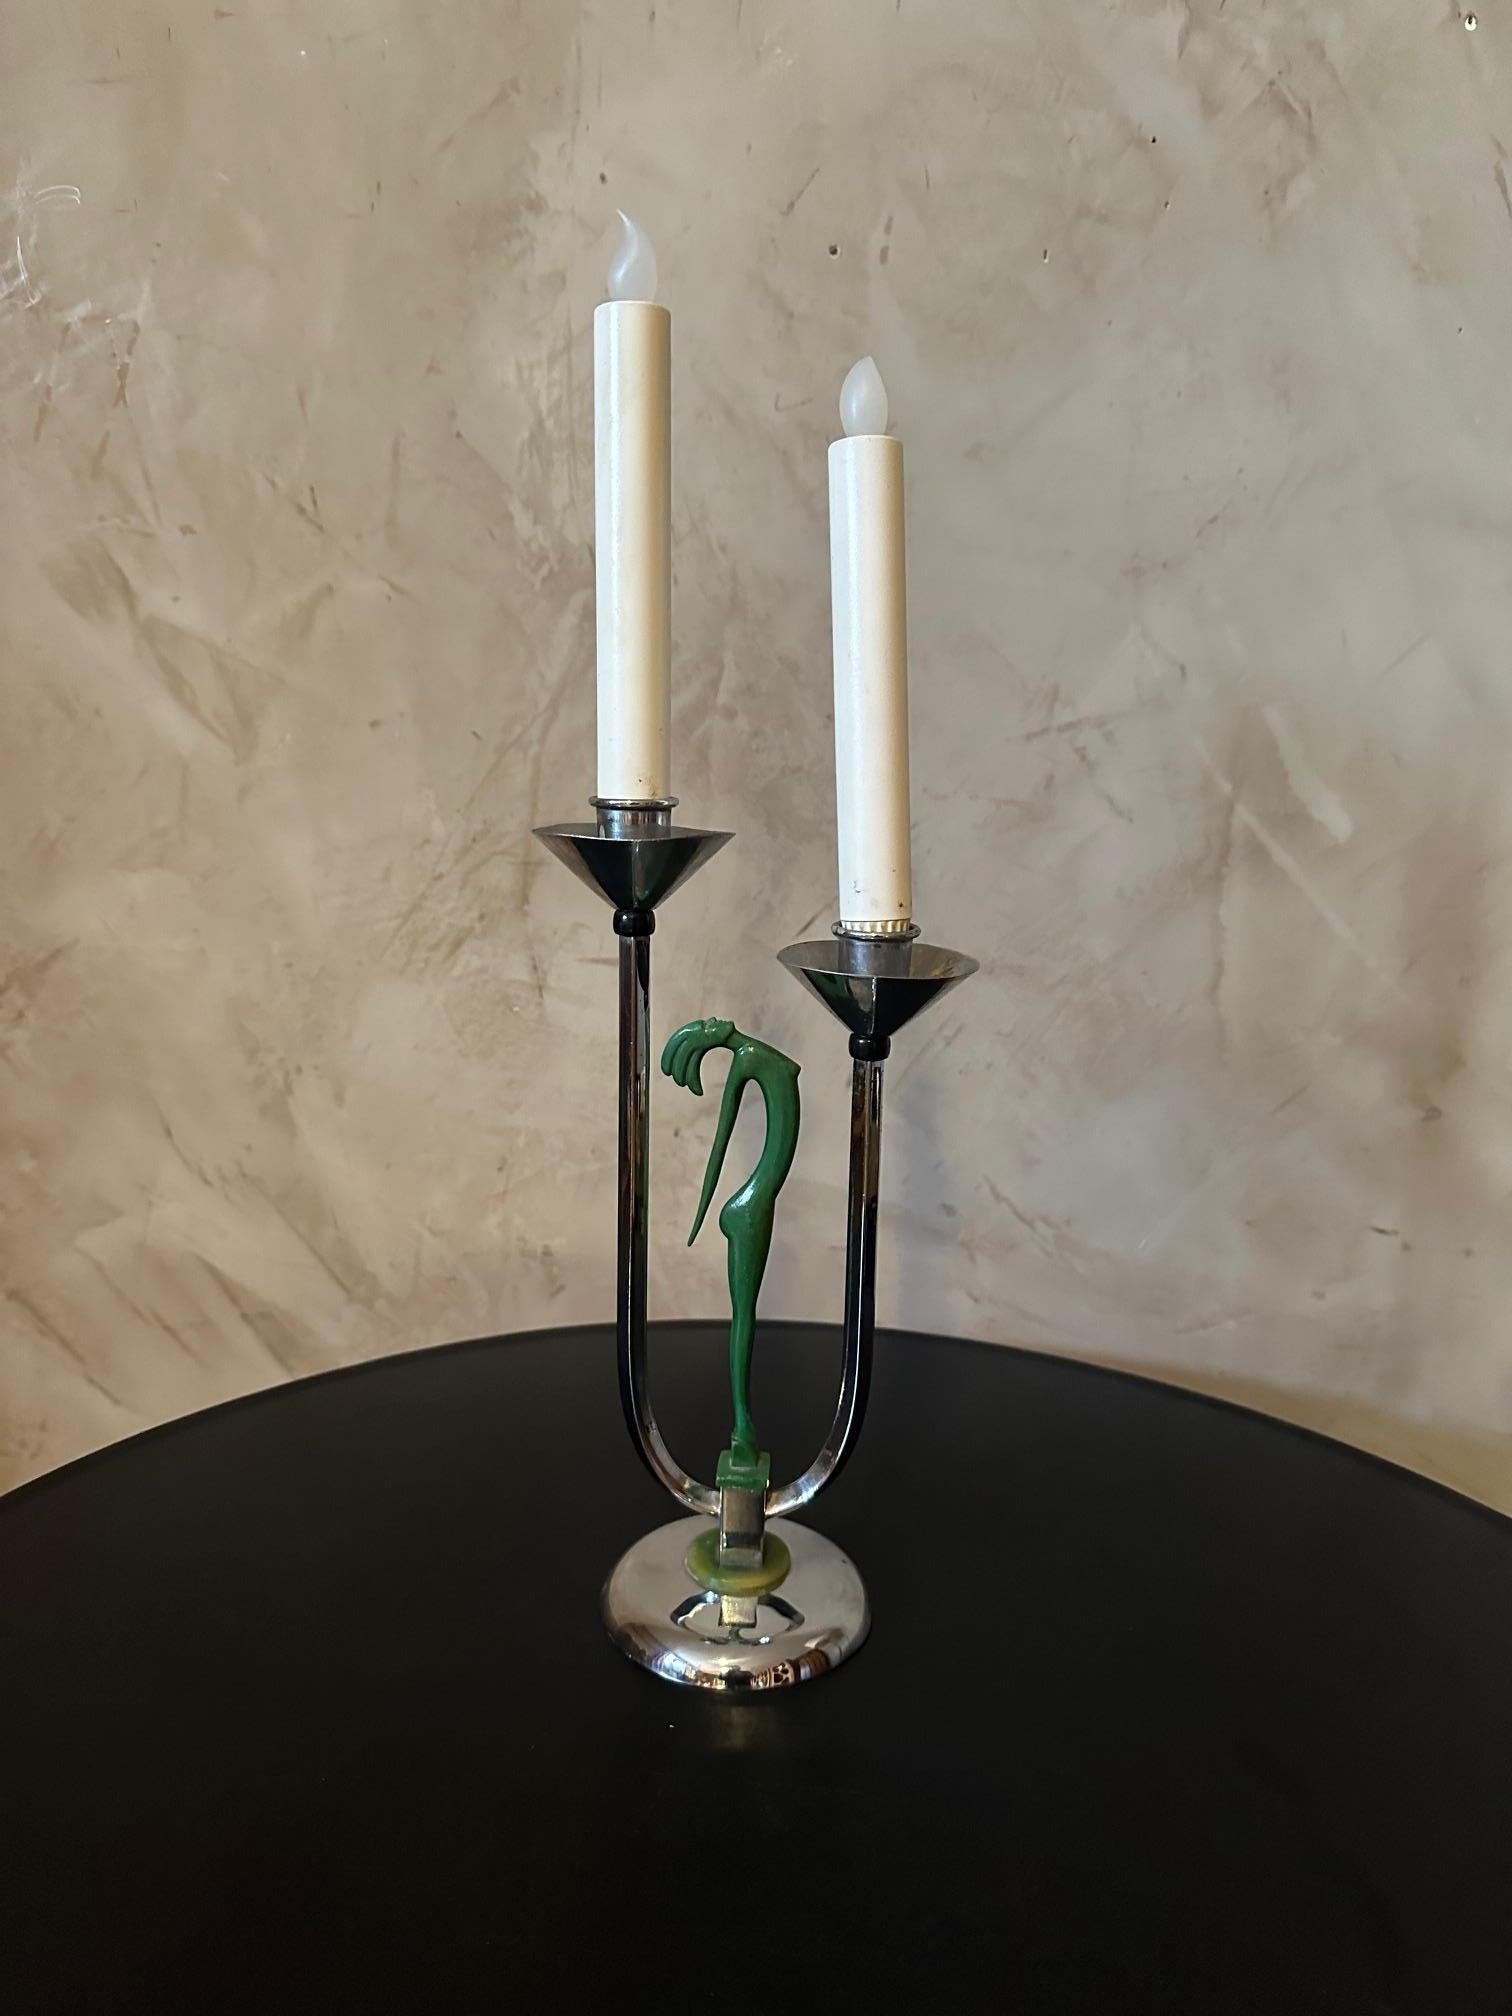 Very beautiful art deco candlestick in good condition in chrome metal which is part of a collection of models intended for the General Electric Company (GEC) of England representing the silhouette of a stylized woman in bronze with a green patina